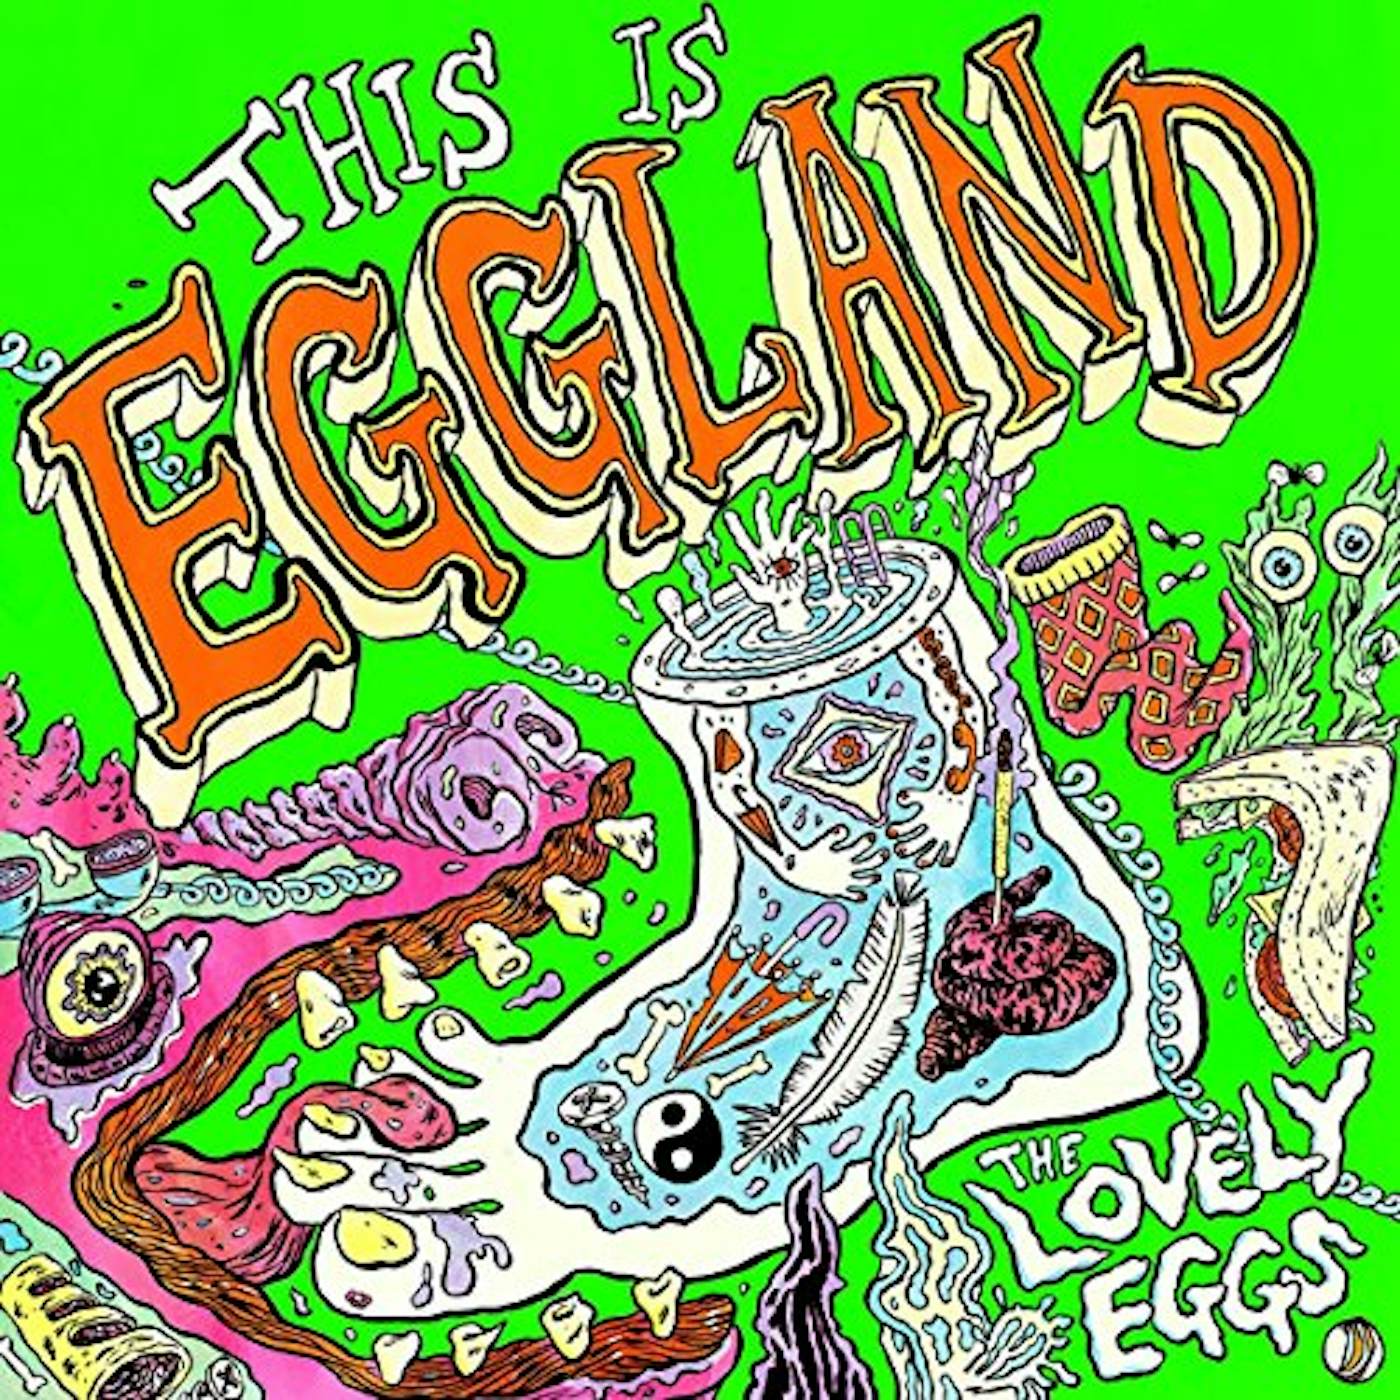 The Lovely Eggs THIS IS EGGLAND CD